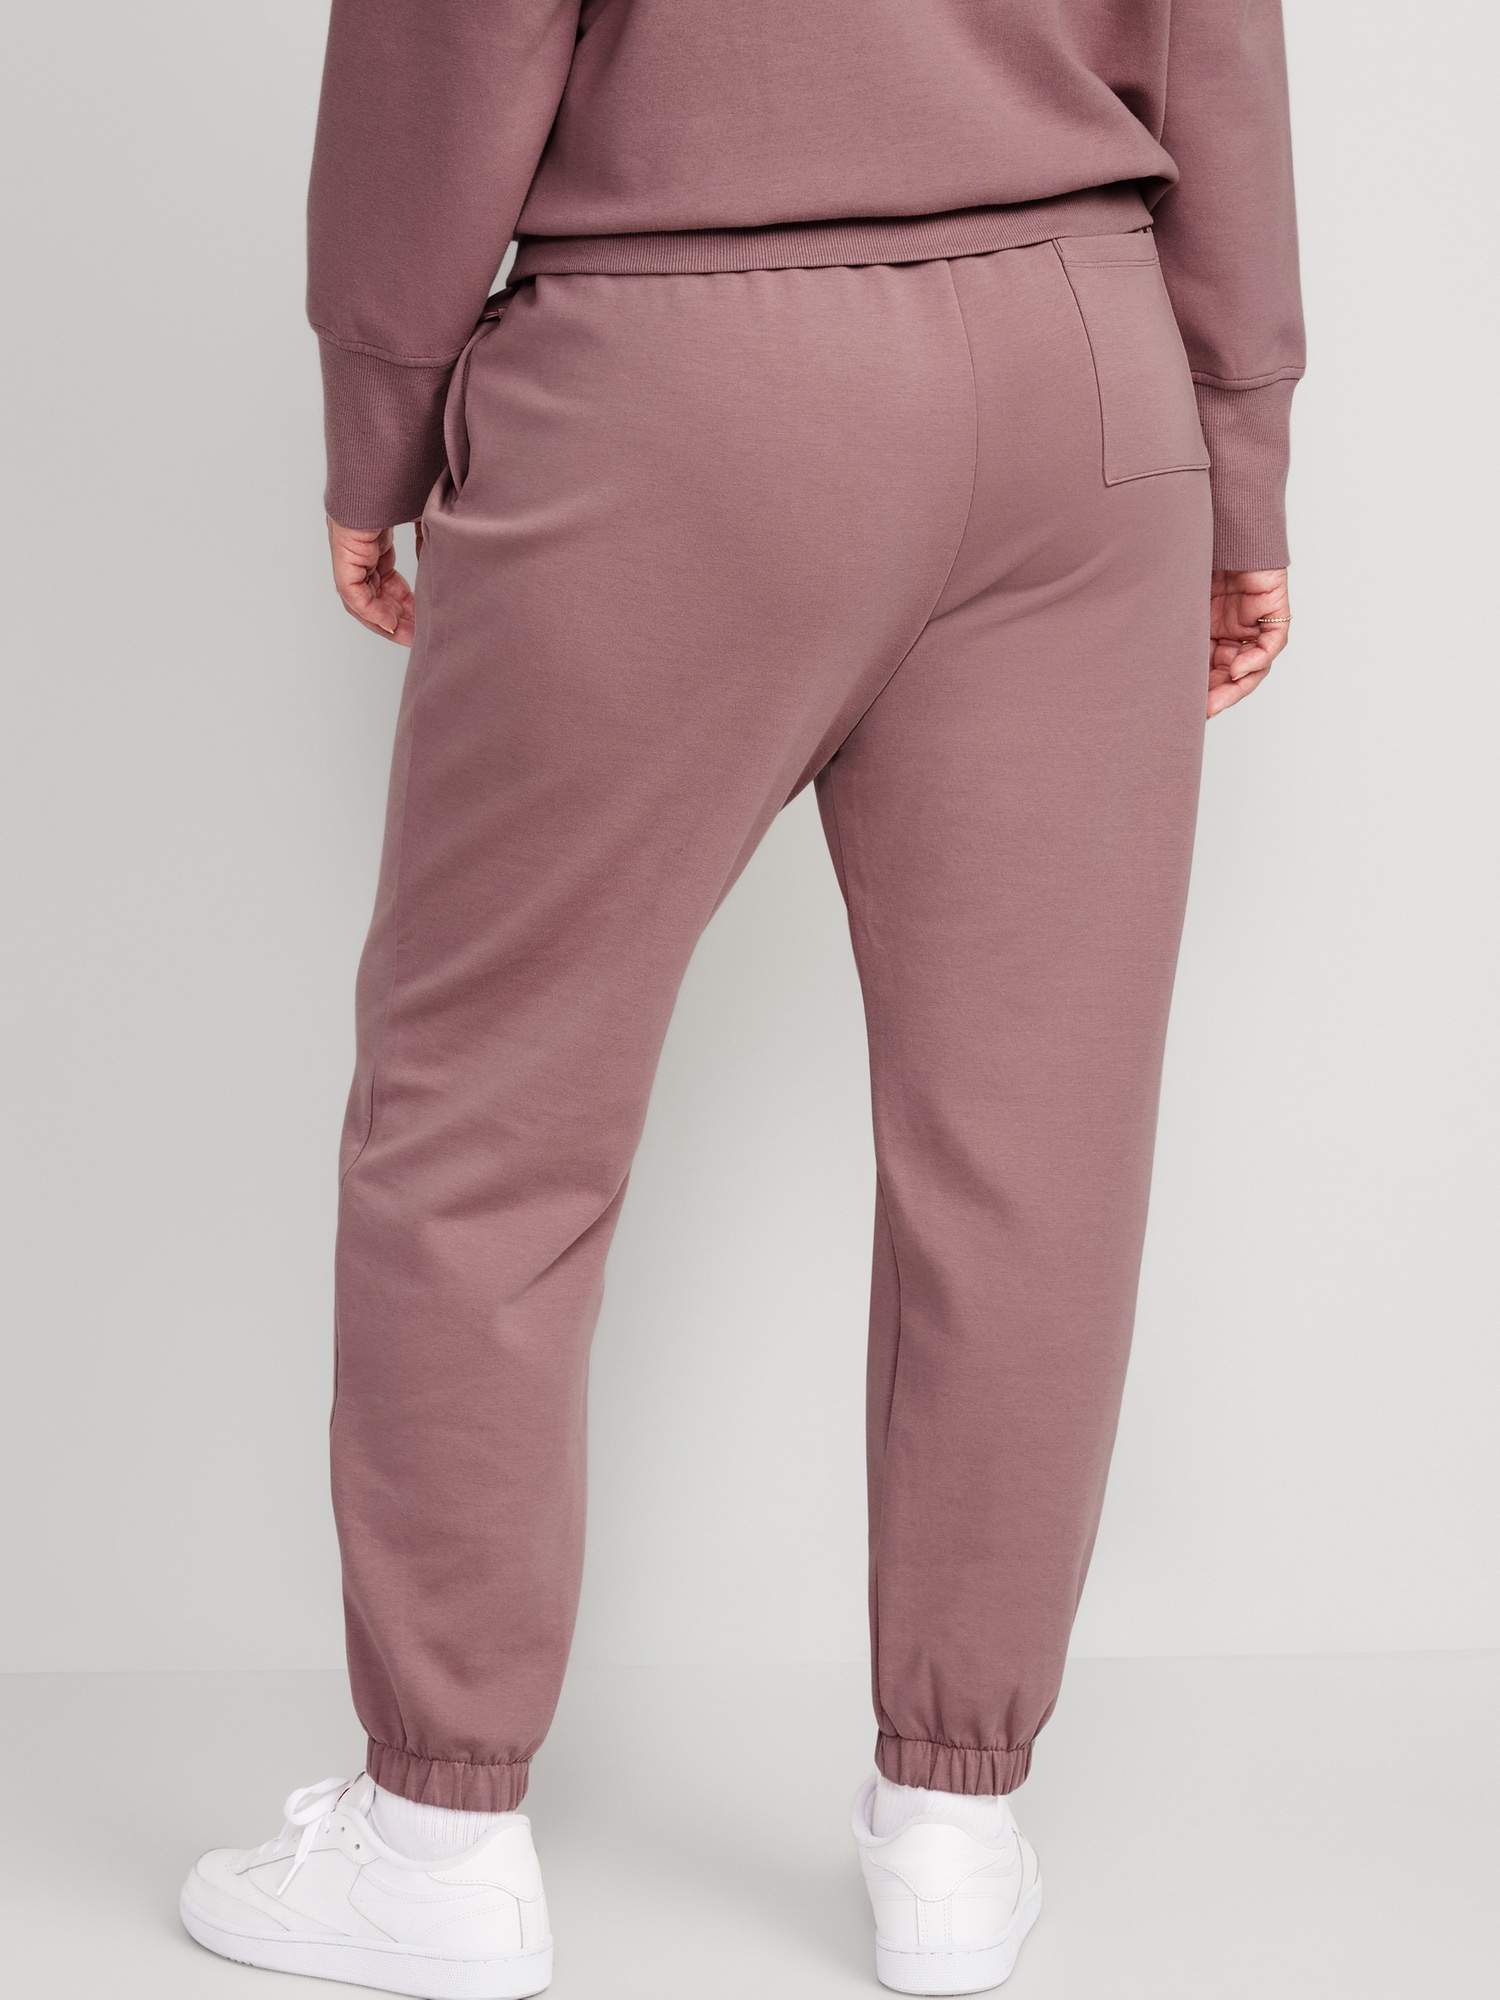 Pink Joggers, High Rise Sweat Pants, Warm Fleece Lined Sweatpants for Women,  Winter High Waisted Sweats, Loose Fit Cotton Trousers 